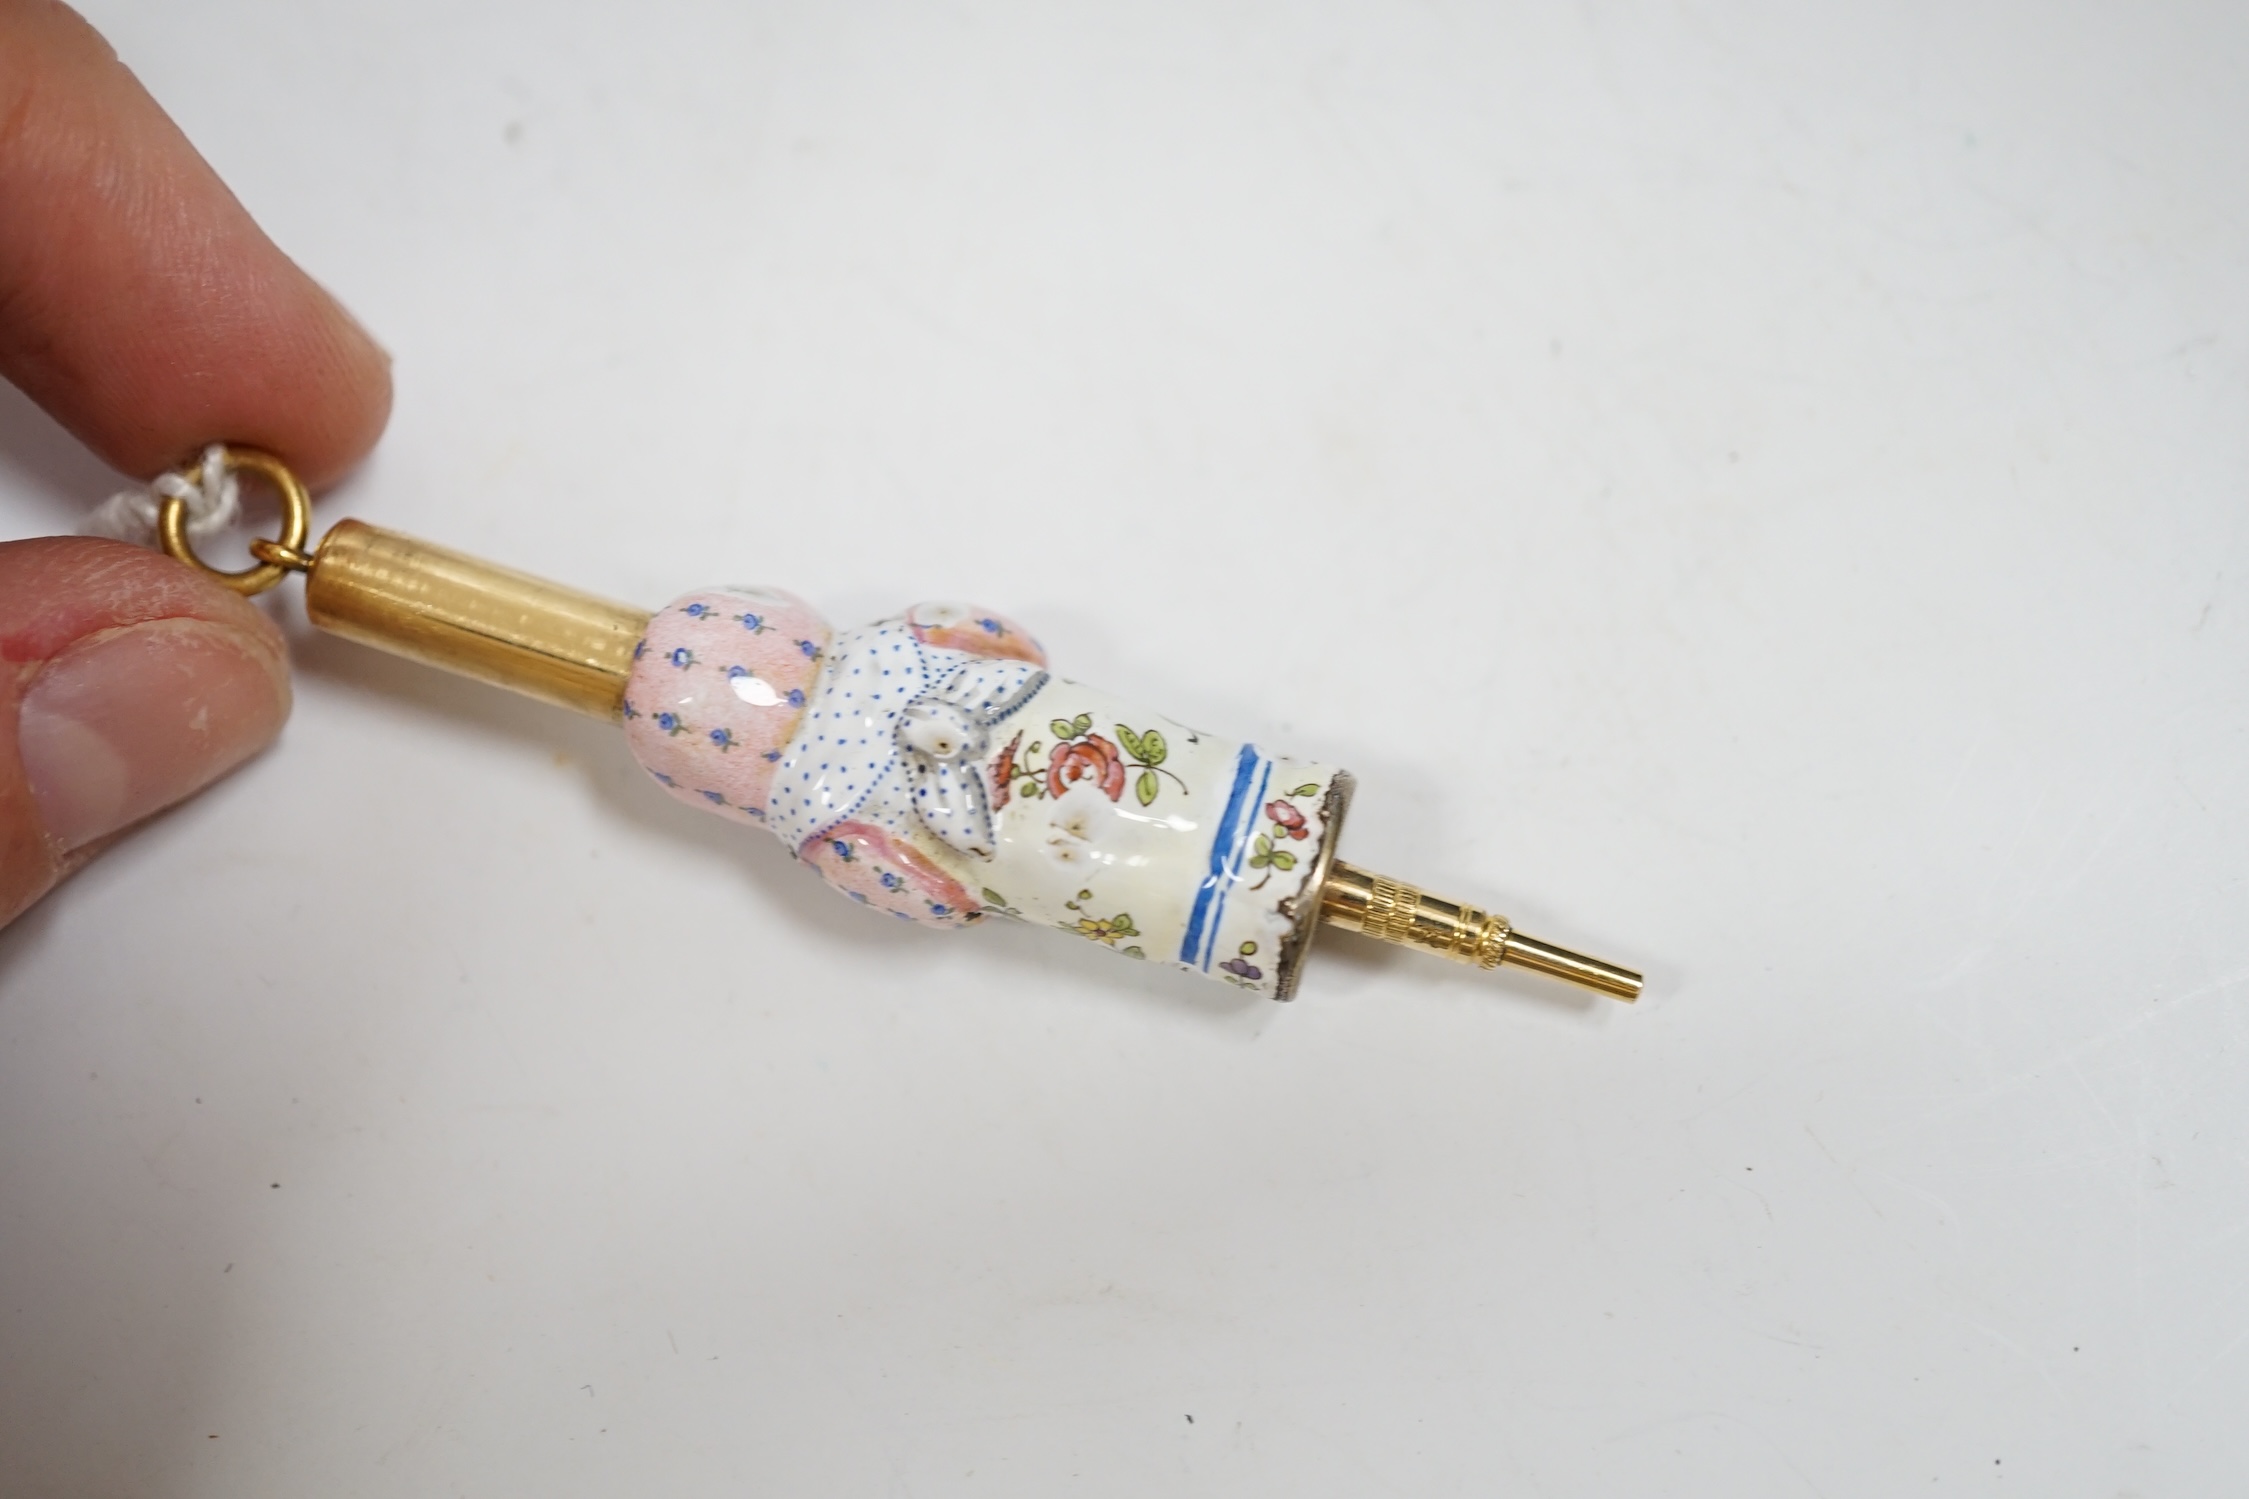 A rare Asprey and Son gilt metal and enamel novelty propelling pencil, c.1875, modelled as an infant holding a rattle. Condition - fair, losses to enamel